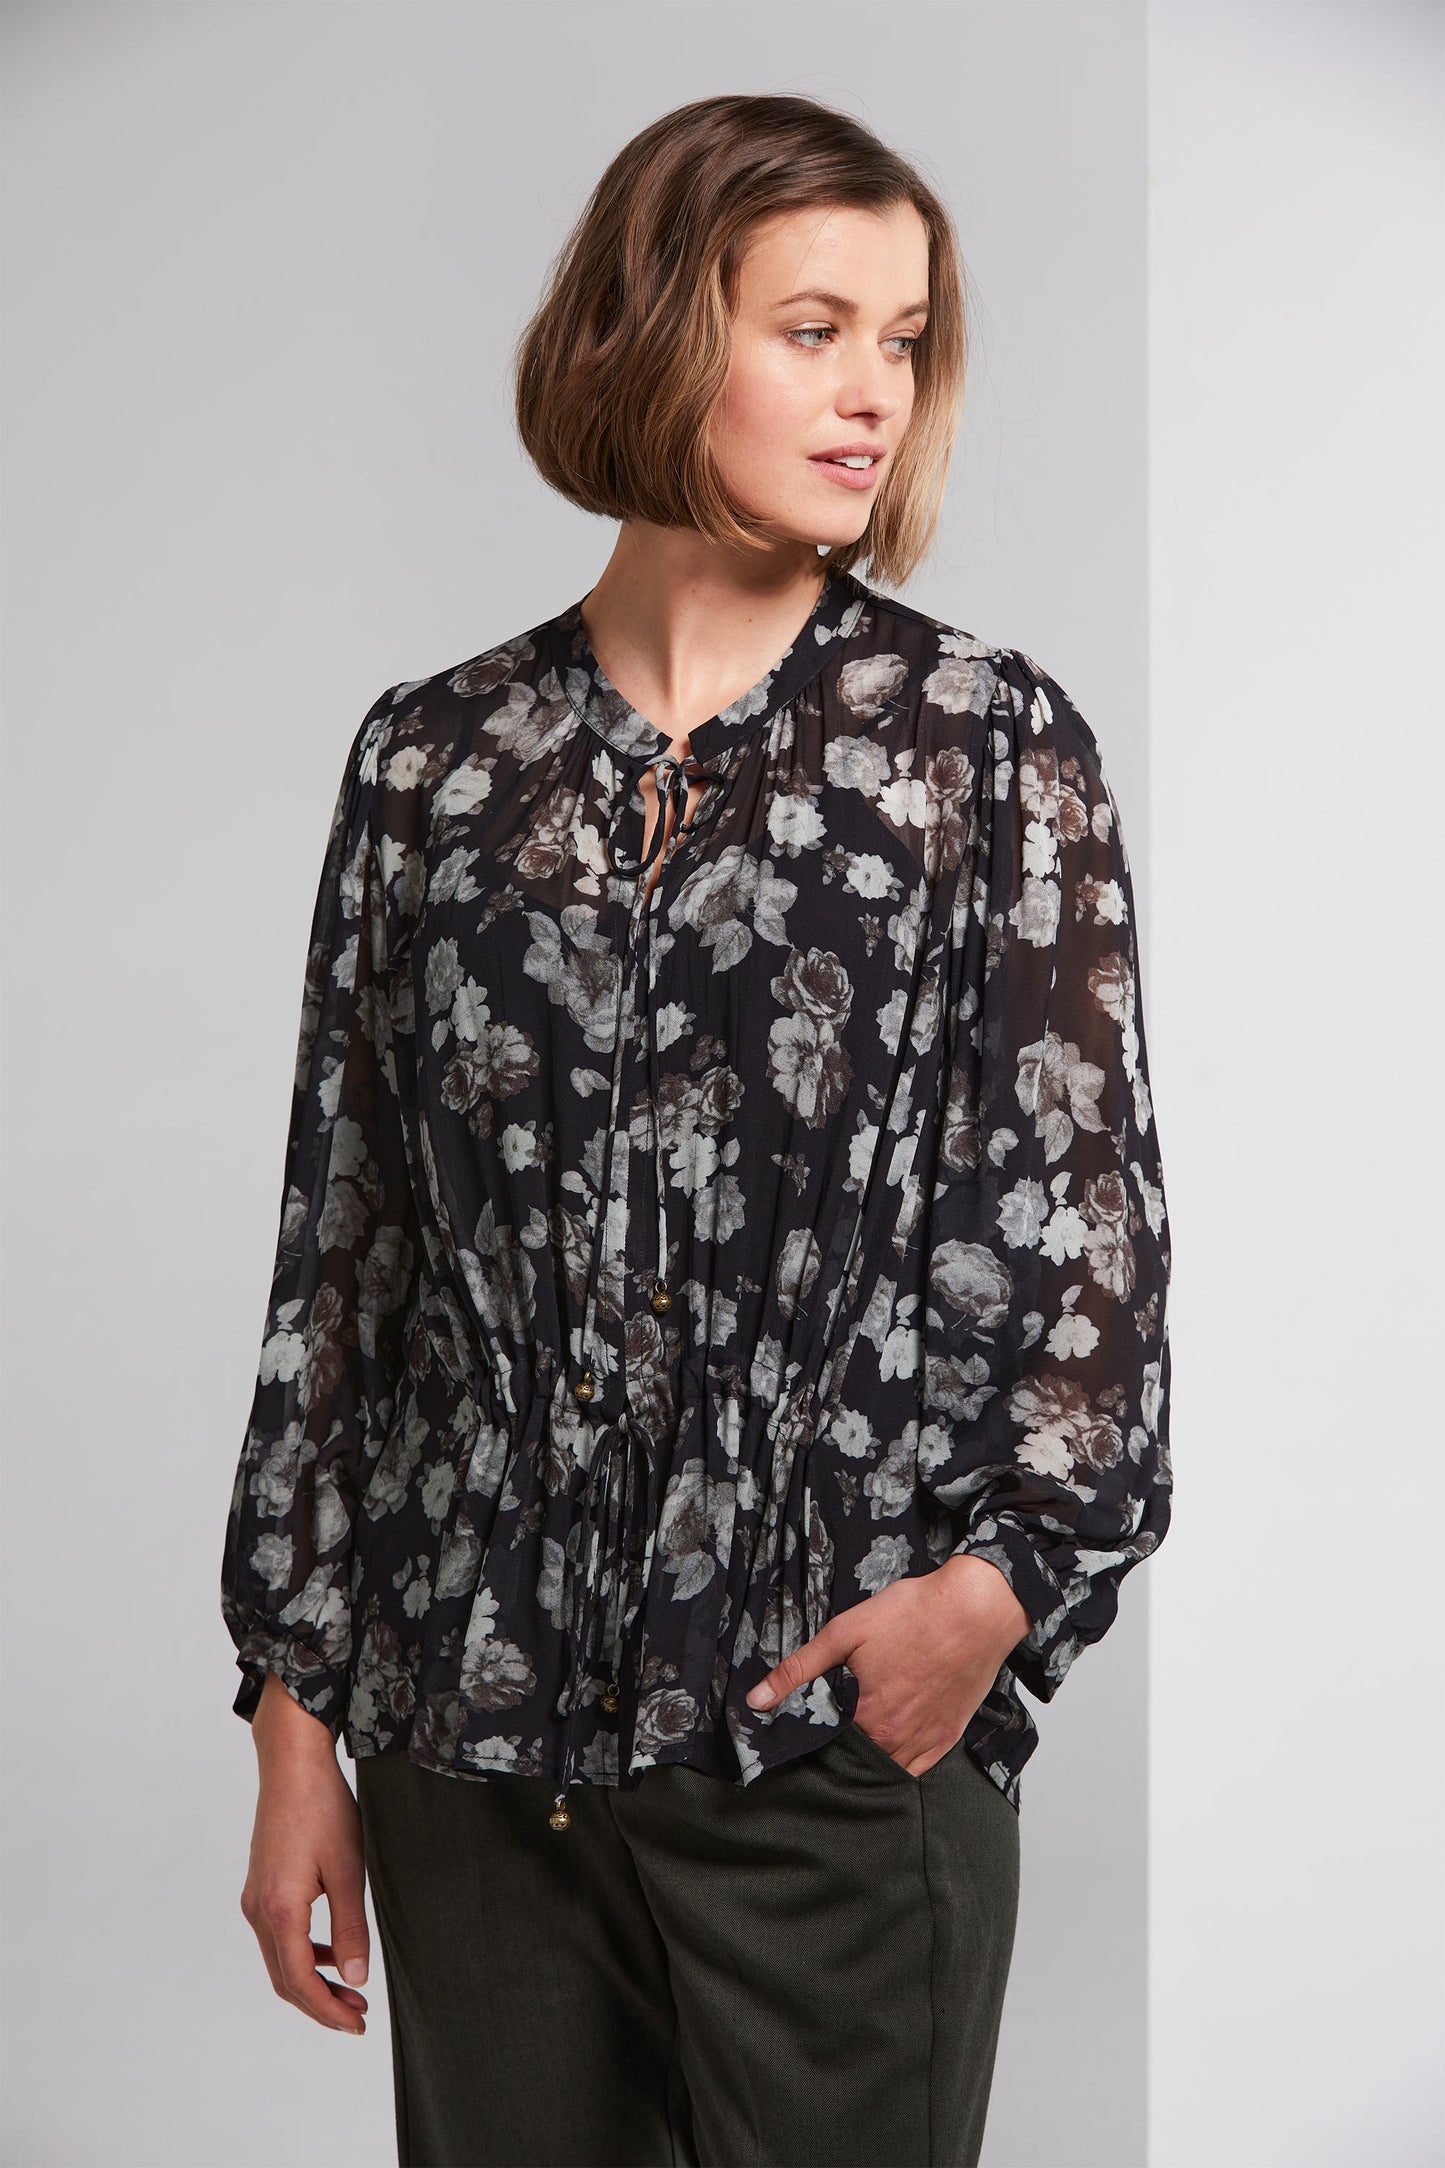 LANIA STIRLING SHIRT - STIRLING PRINT - THE VOGUE STORE